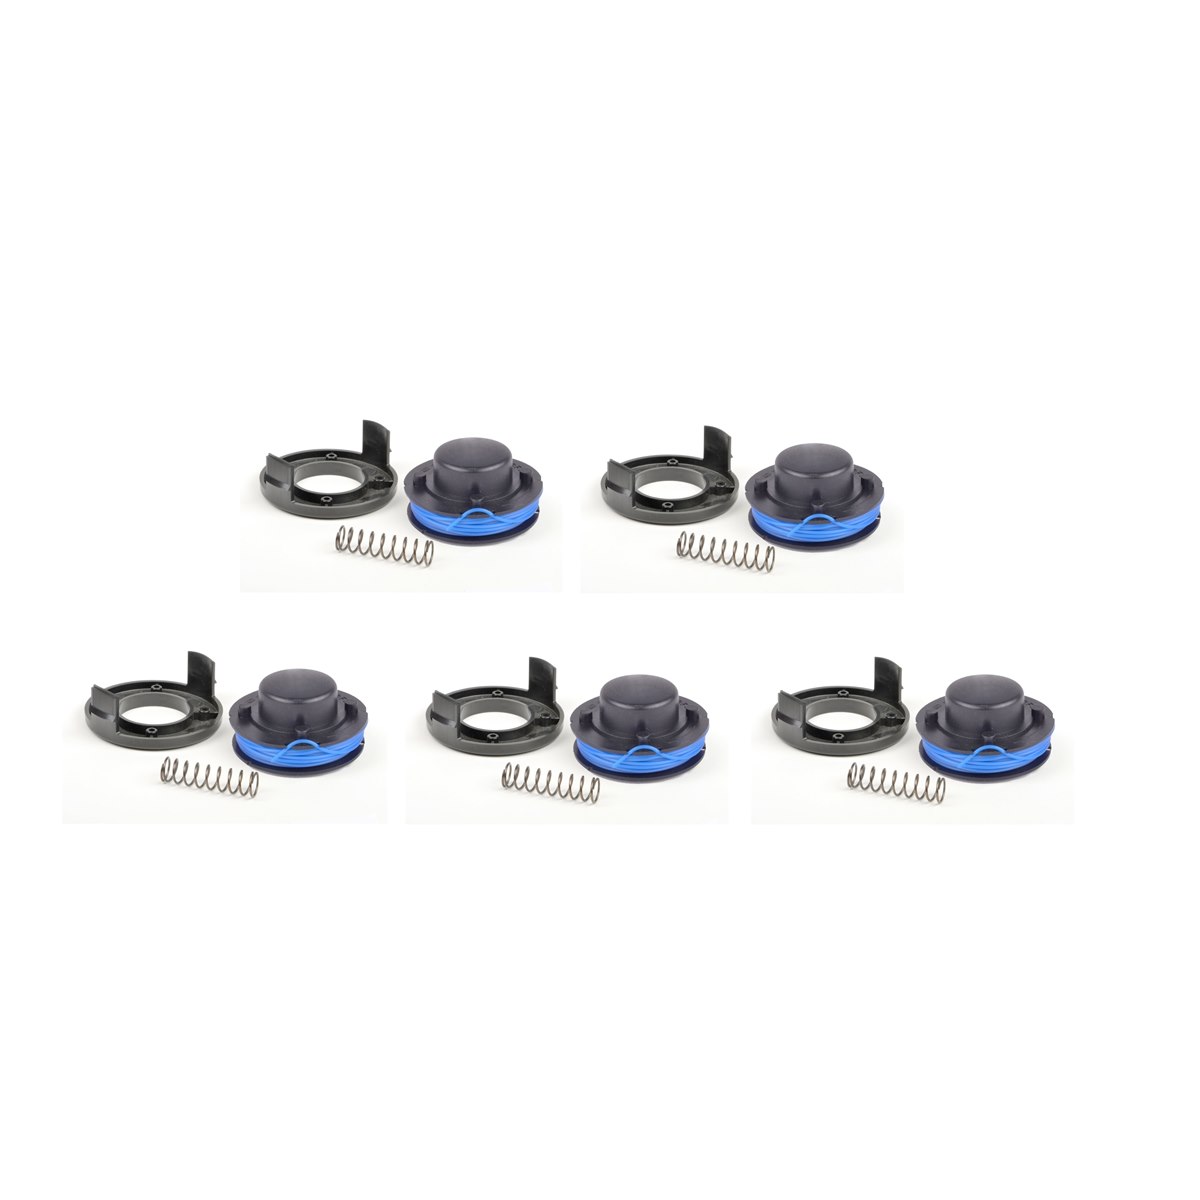 Case of 5 x ALM CG402 Replacement Spool, Line and Cover for Draper Grass Trimmers